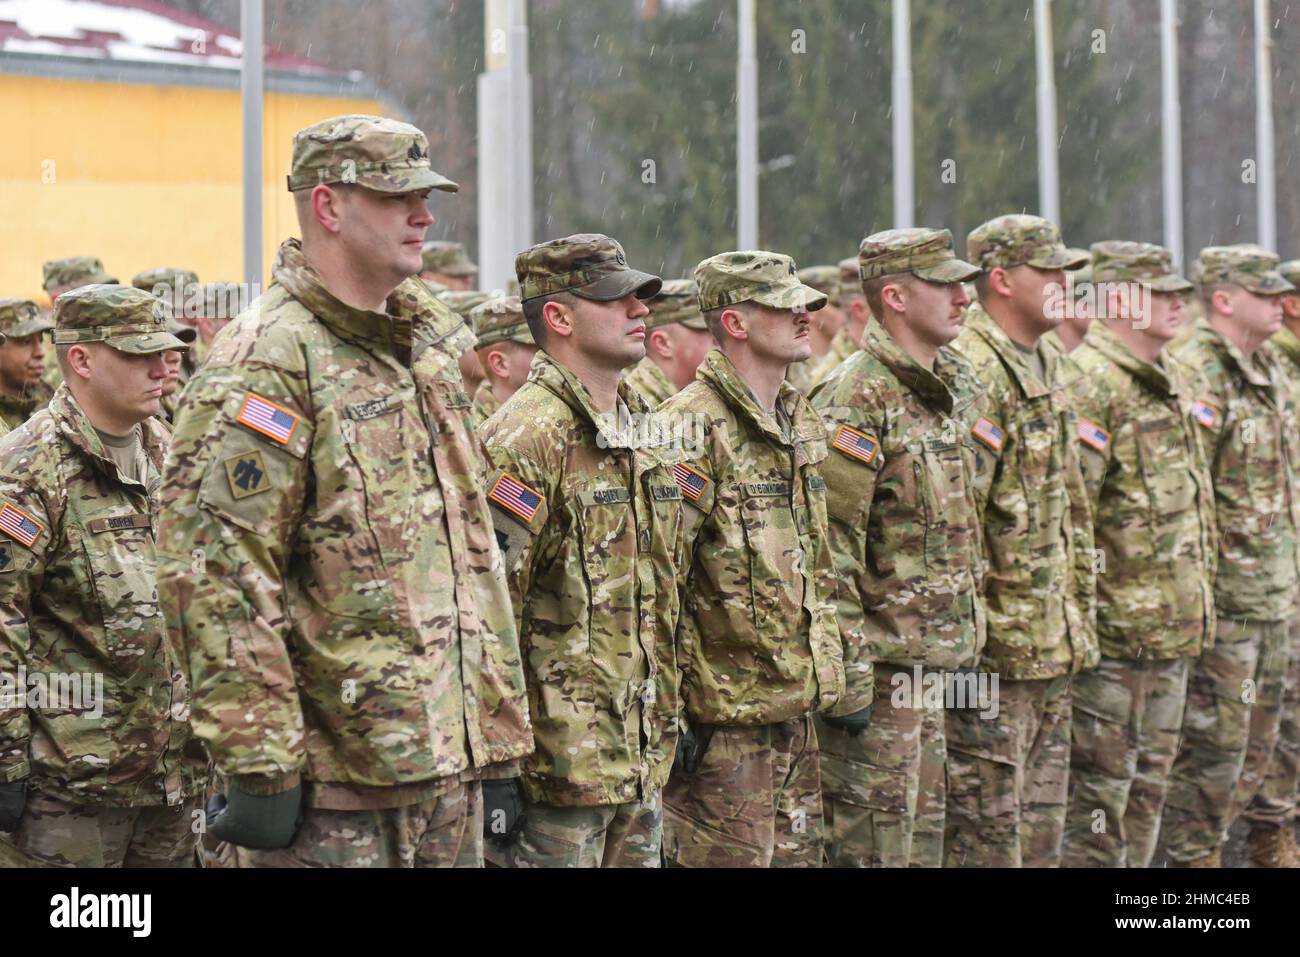 USA instructors seen during the opening ceremony of the next stage of training of the Armed Forces units under the program 'Joint Multinational Training Group - Ukraine' (JMTG-U). Stock Photo